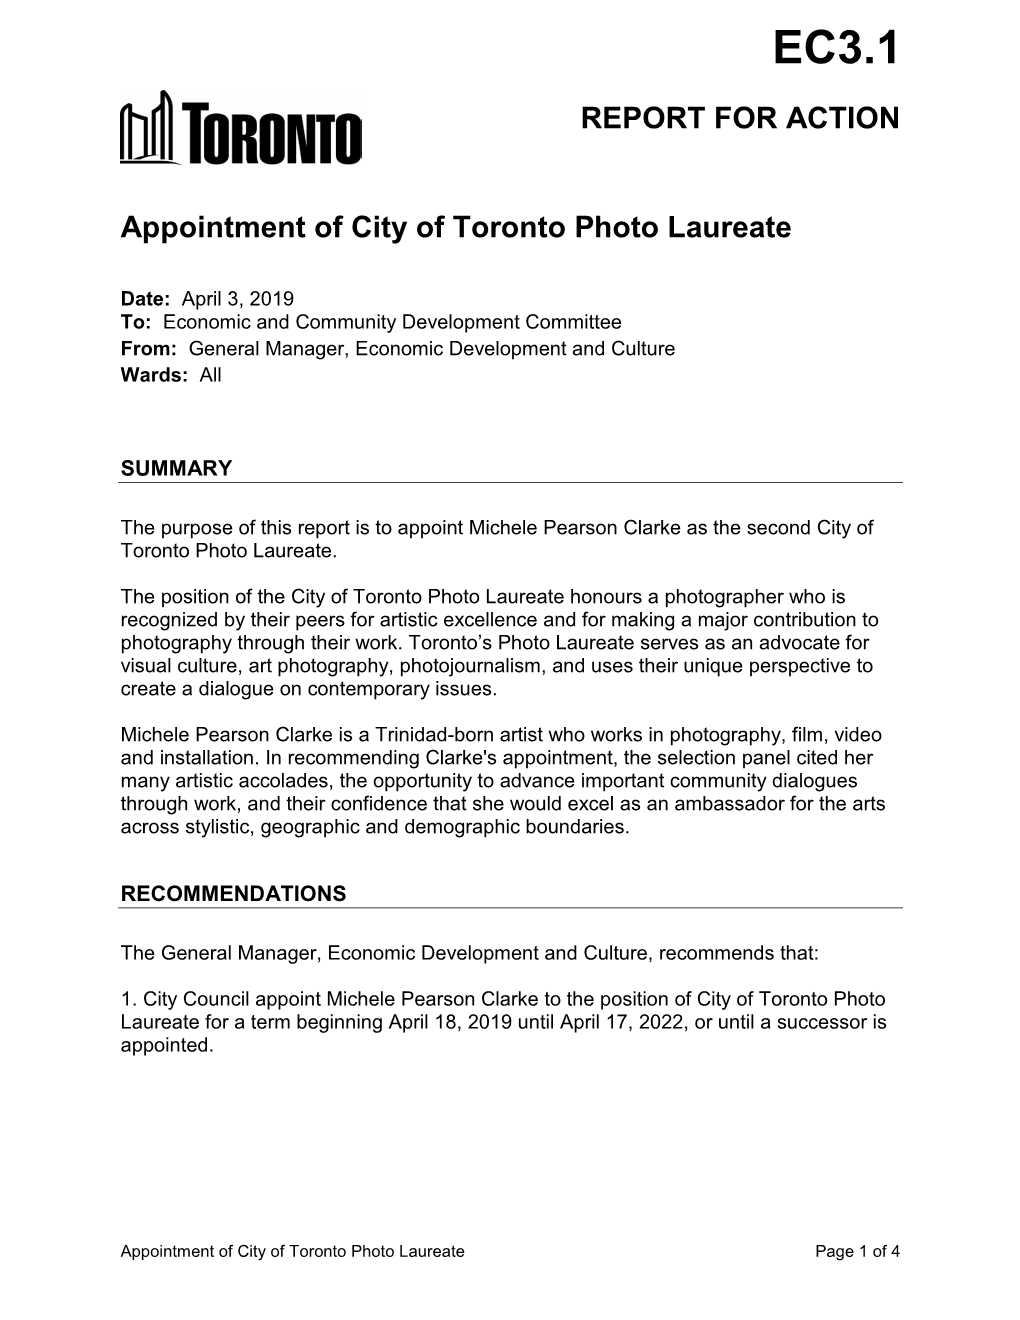 Appointment of City of Toronto Photo Laureate